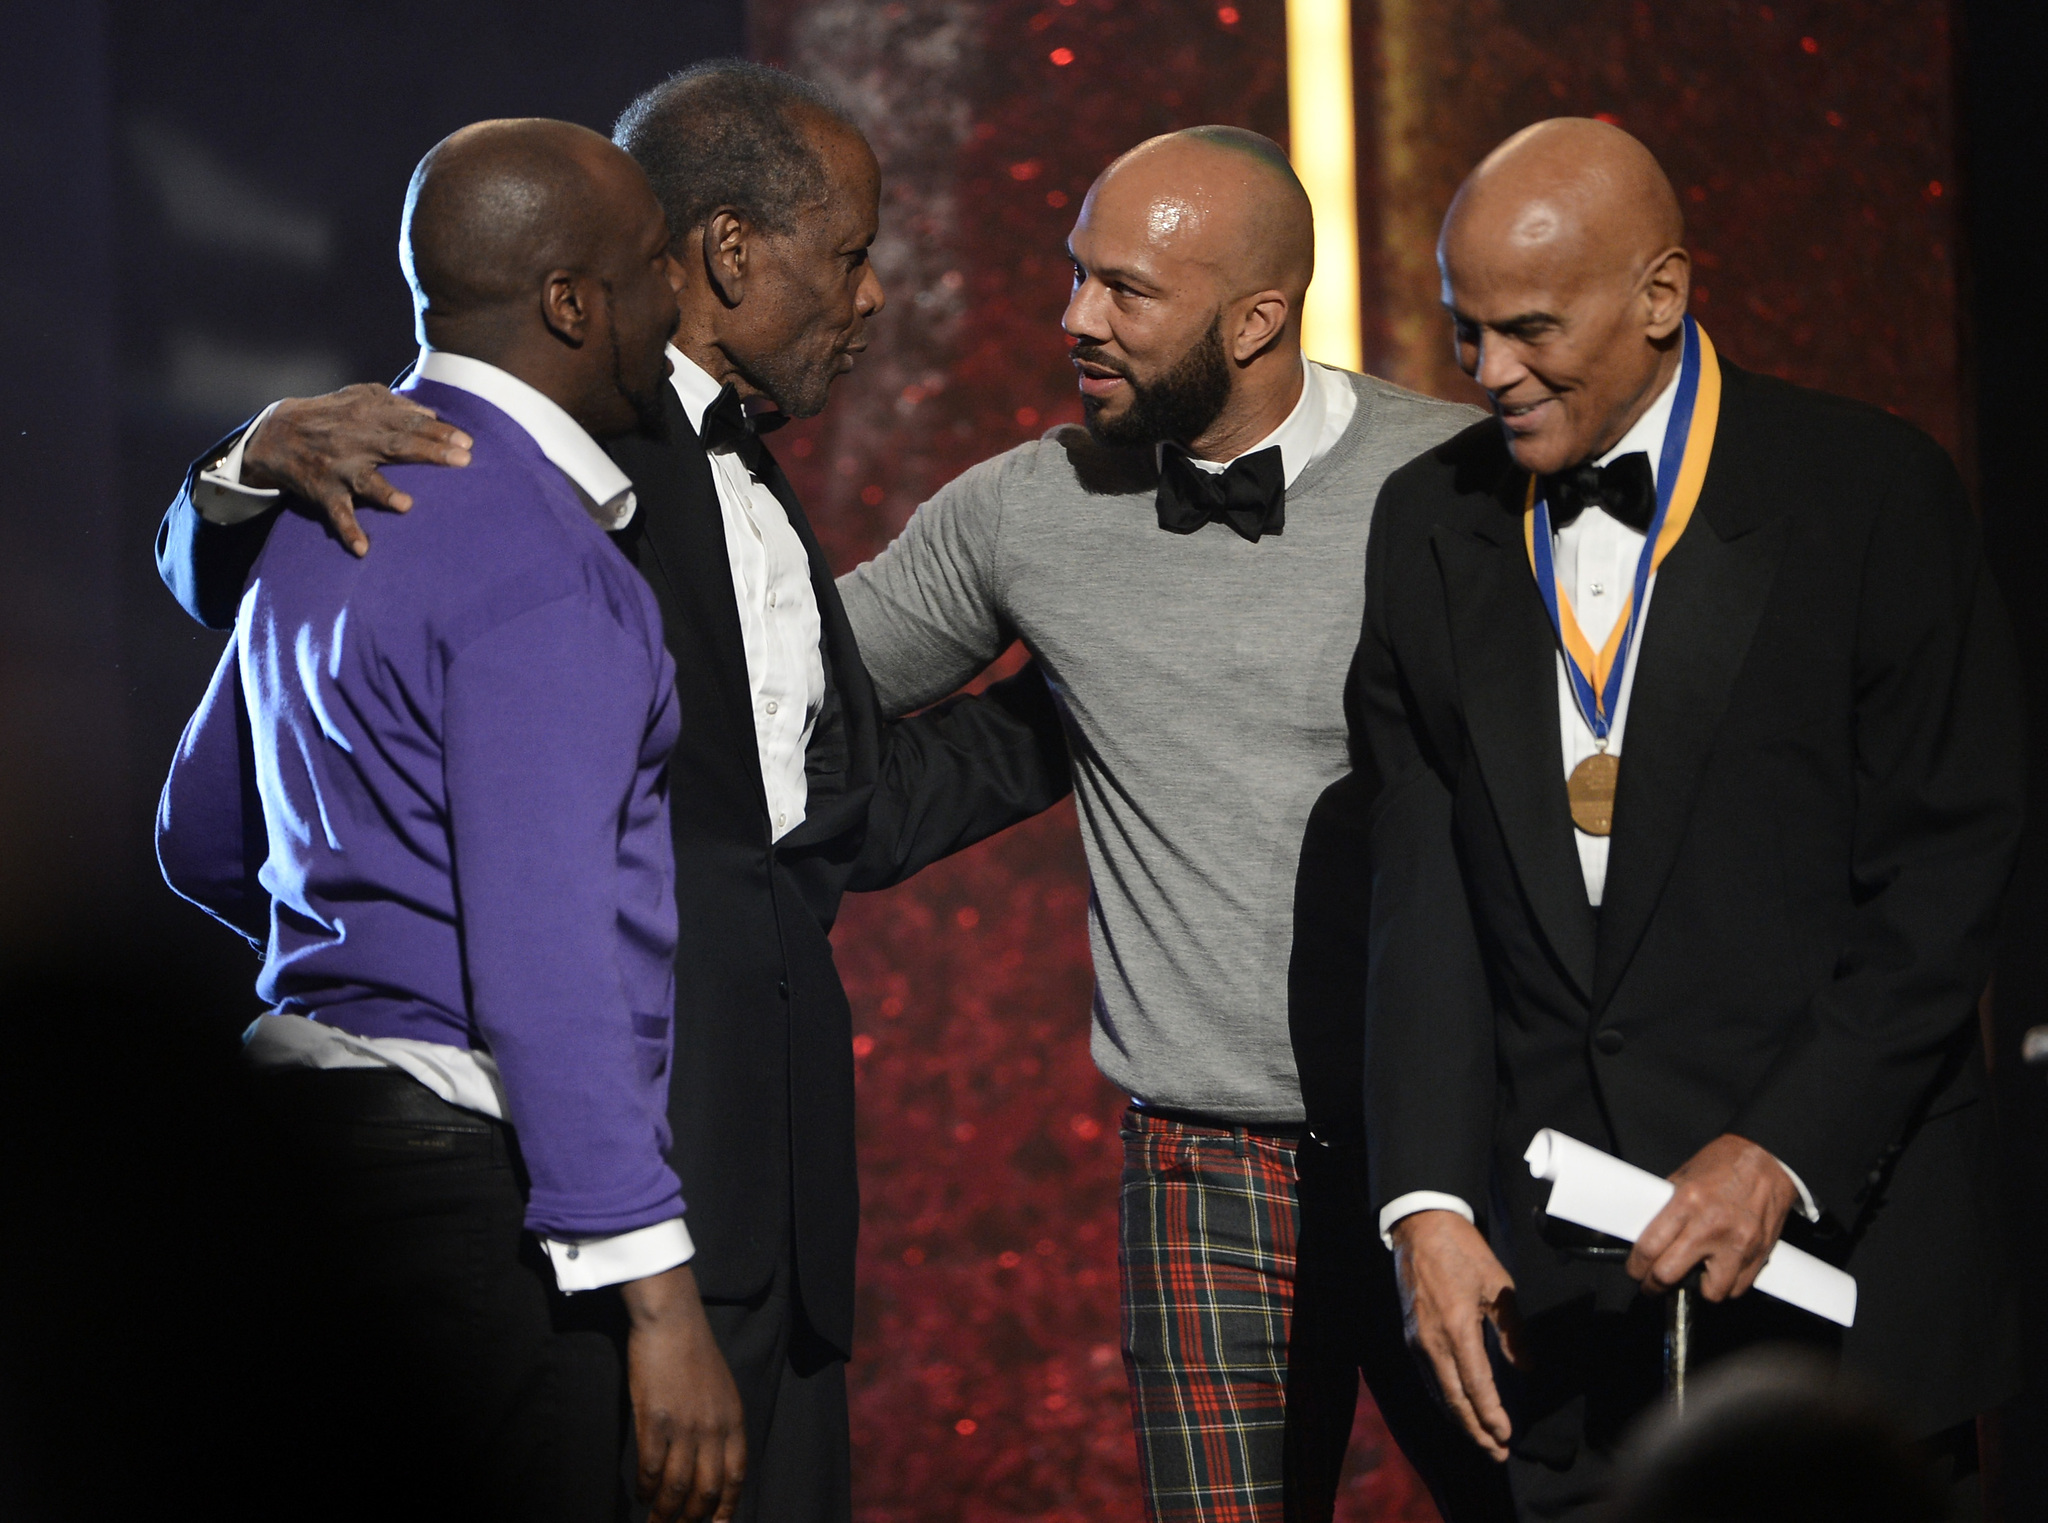 Harry Belafonte, Sidney Poitier, Wyclef Jean and Common